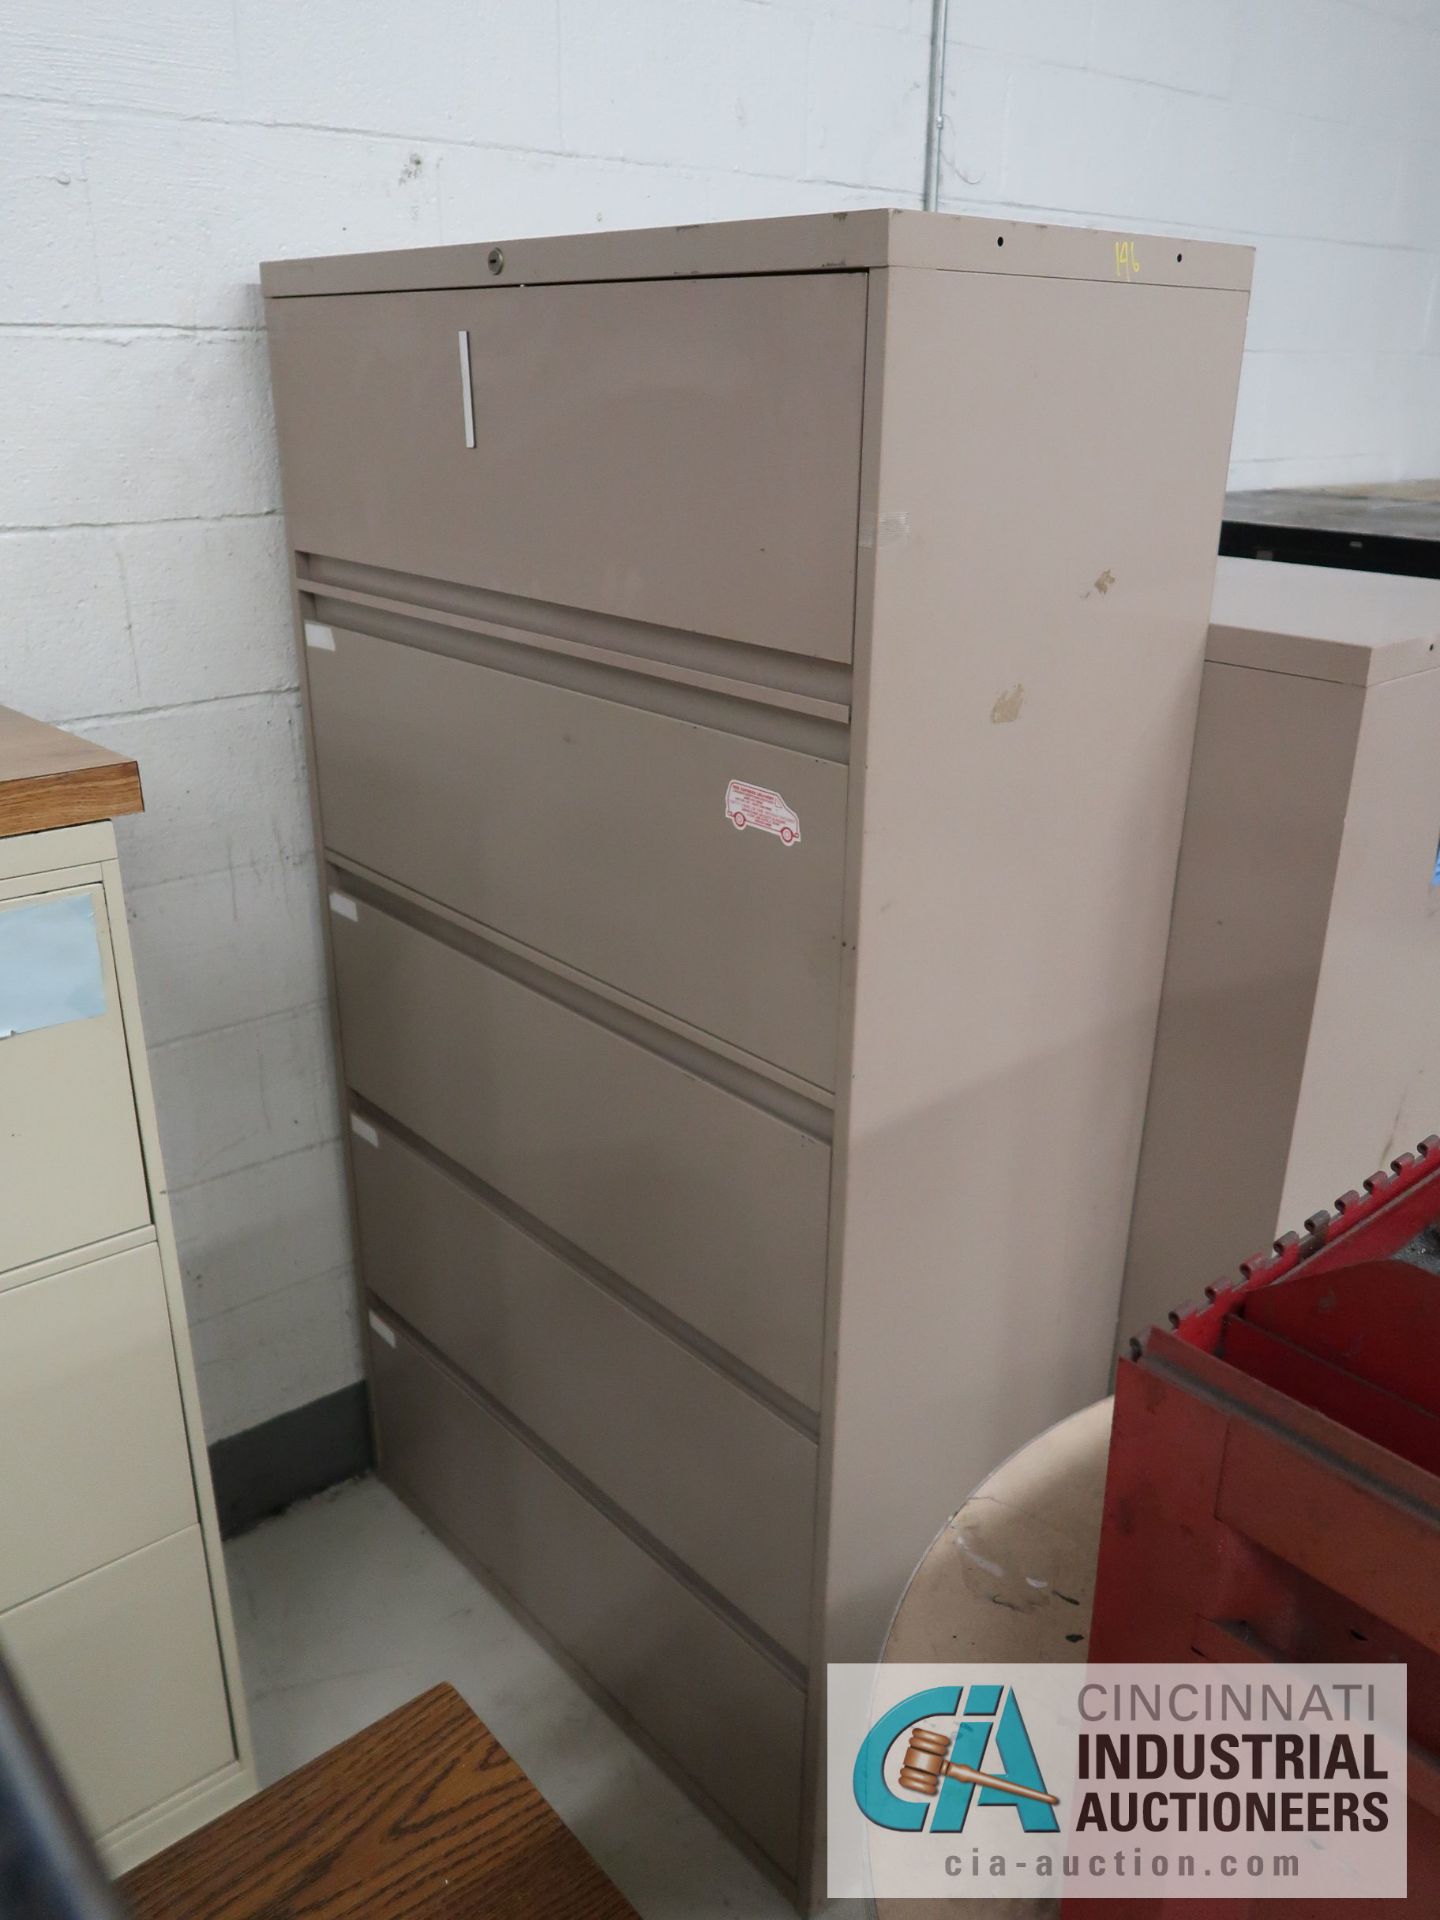 (LOT) 5-DRAWER & 4-DRAWER LATERAL FILE CABINETS - Image 2 of 2